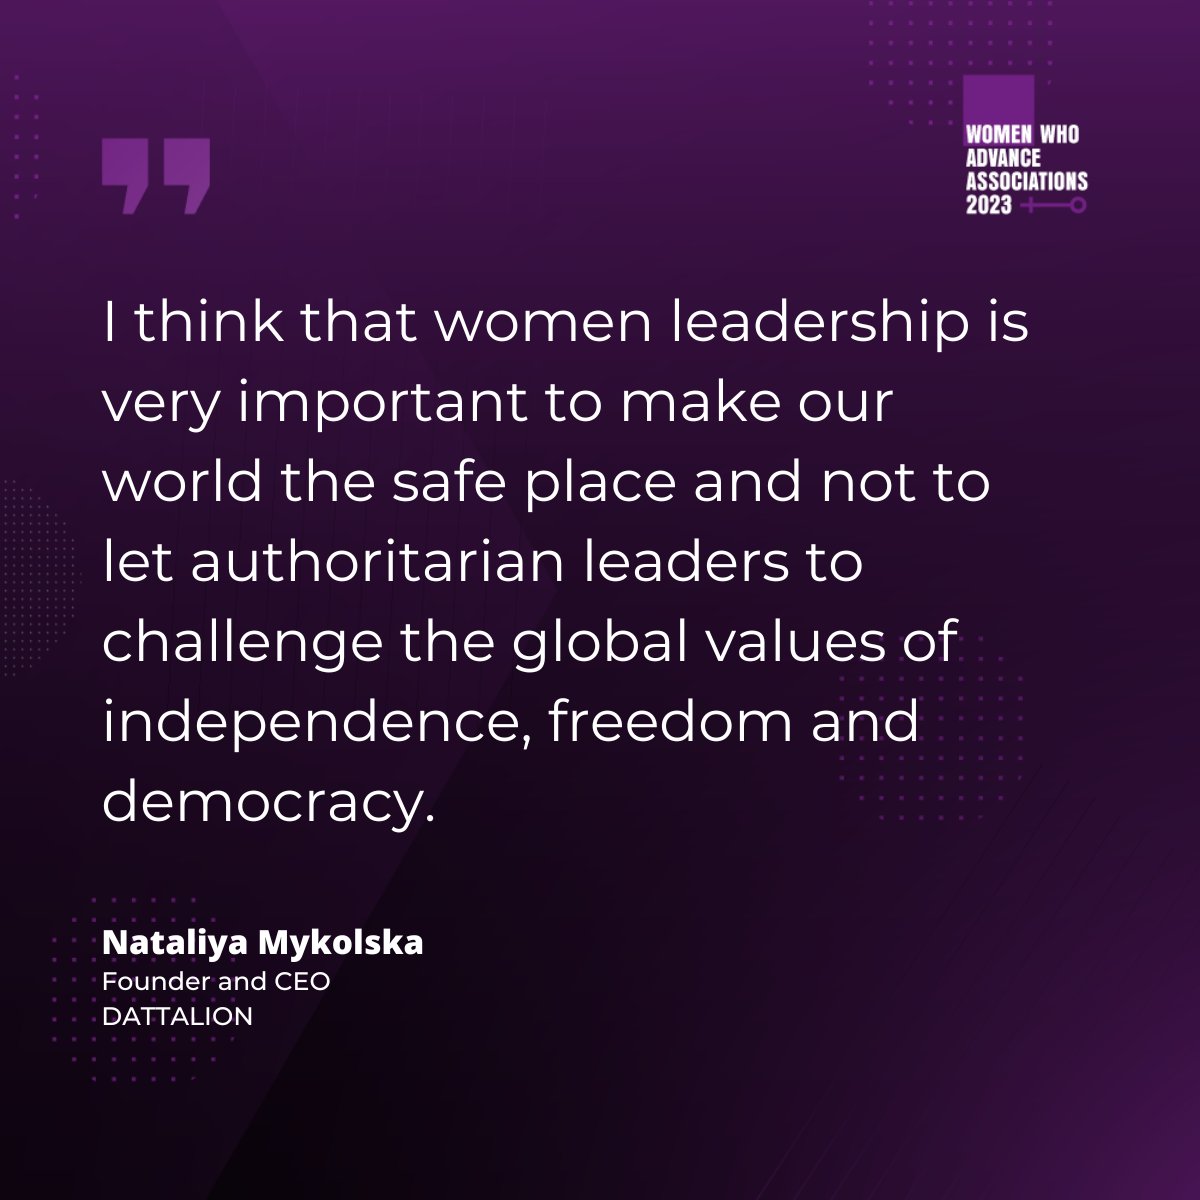 👨‍💼 Nataliya Mykolska is the Founder and CEO of @dattalion.

She’s a women’s rights activist and co-founded the women empowerment @SheExports Platform. 

Read Nataliya's full interview here ⬇
womenwhoadvance.eu/nataliya-mykol…